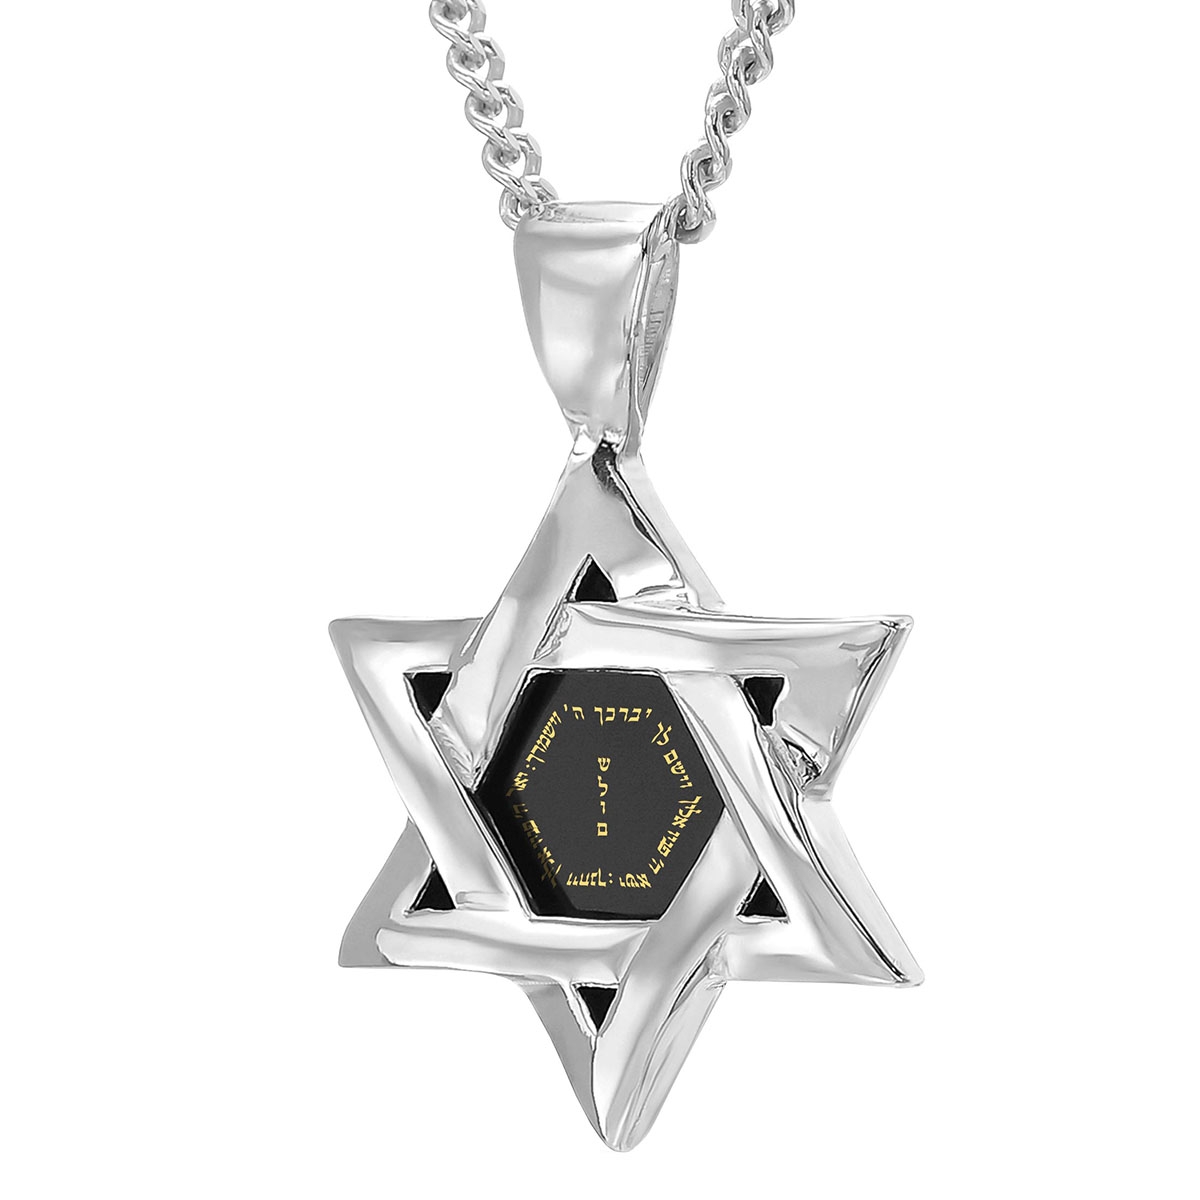 925 Sterling Silver Men's Star of David Priestly Blessing Necklace With Onyx Stone and 24K Gold Inscription (Numbers 6:24-26) - 1